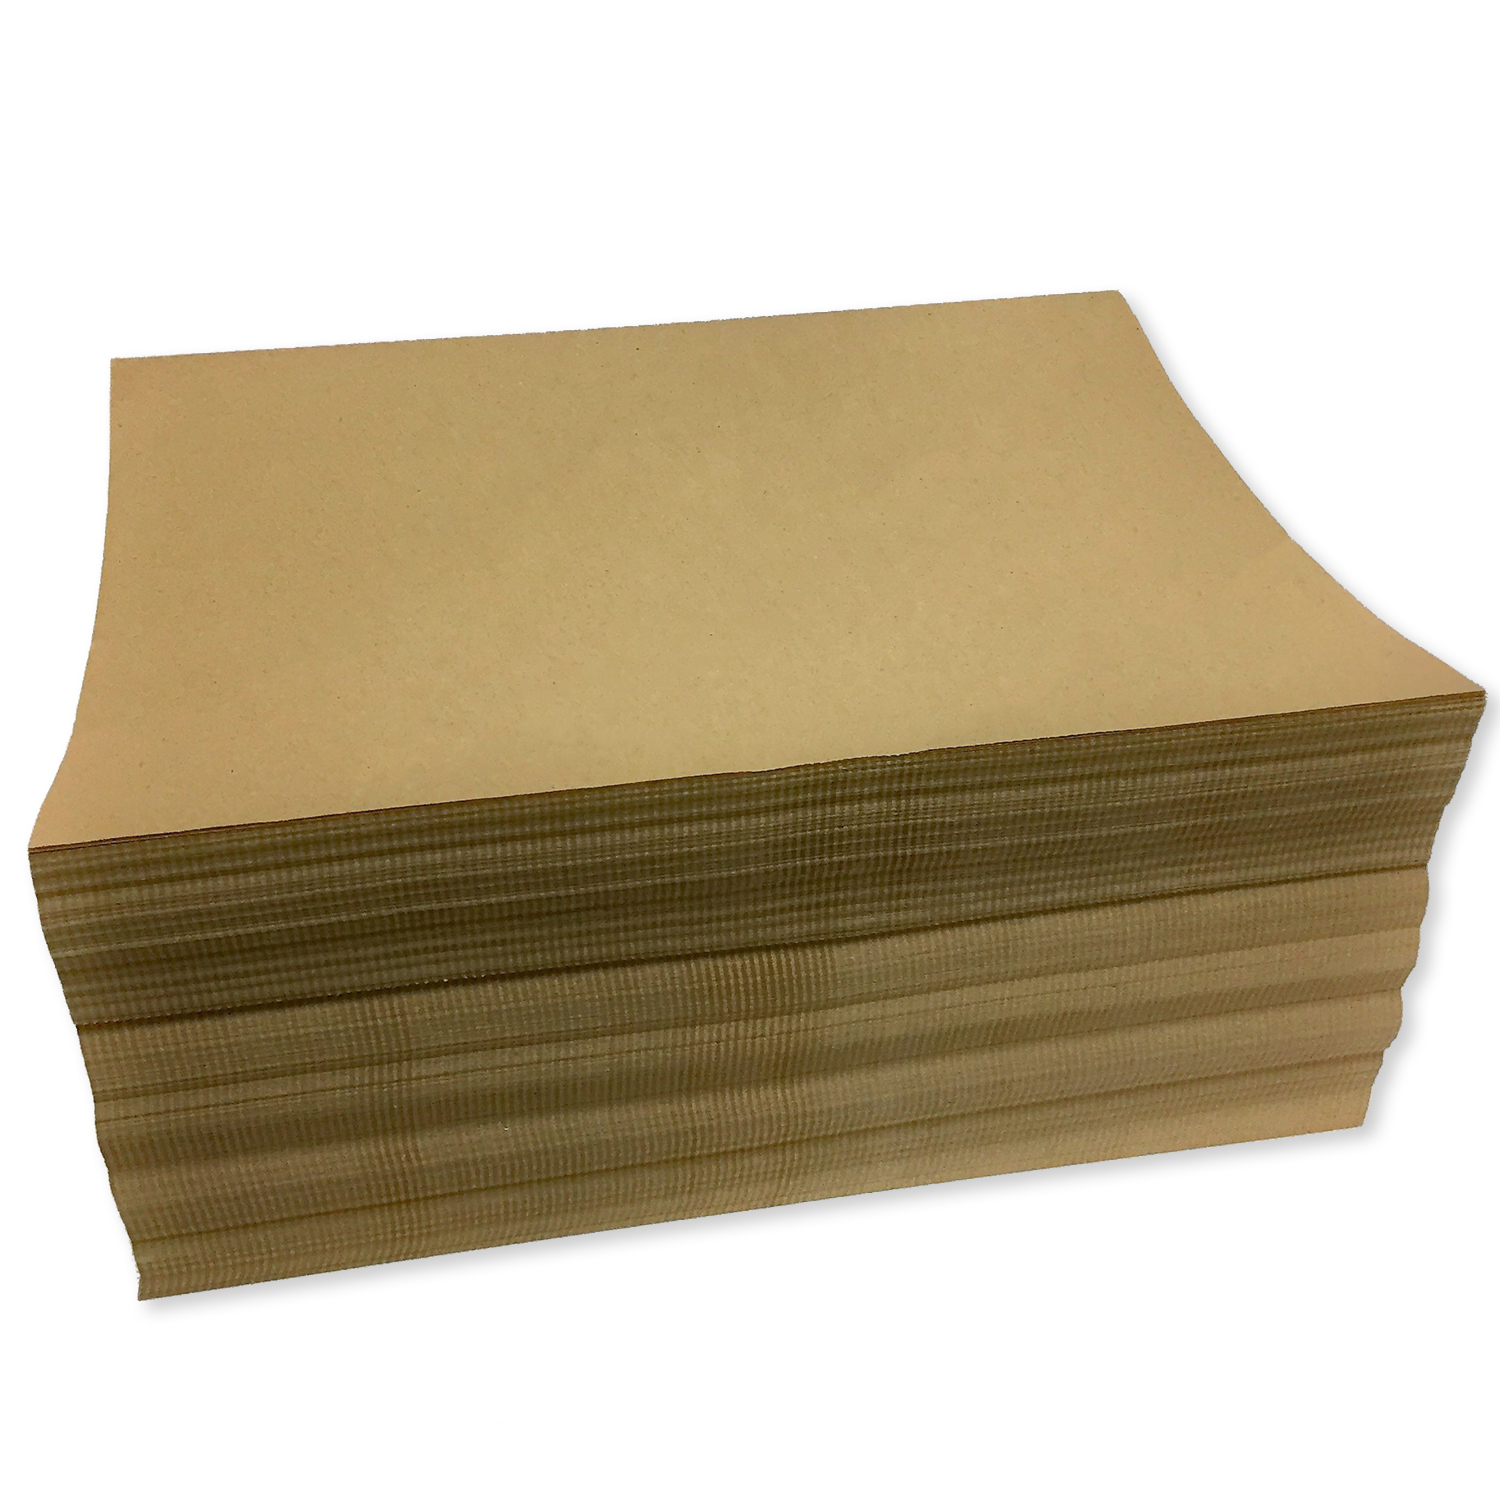 15" x 11" Fanfold 40# Brown Kraft Void Fill Packing Paper (Ream of 800 Feet)